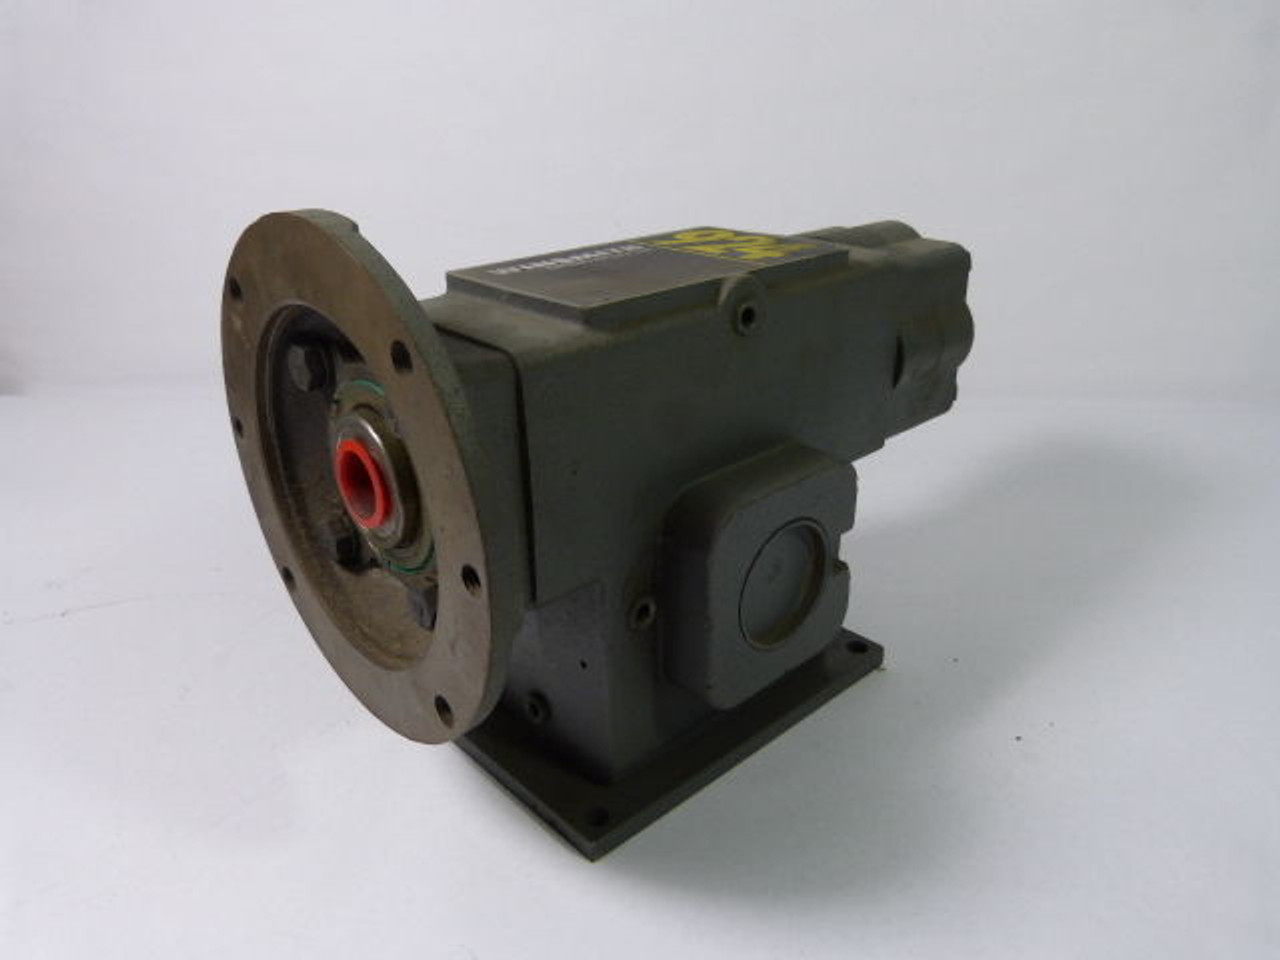 Winsmith 924MDTE Worm Gear Reducer 30:1 Ratio 1007lb-in 1HP@1750Rpm USED